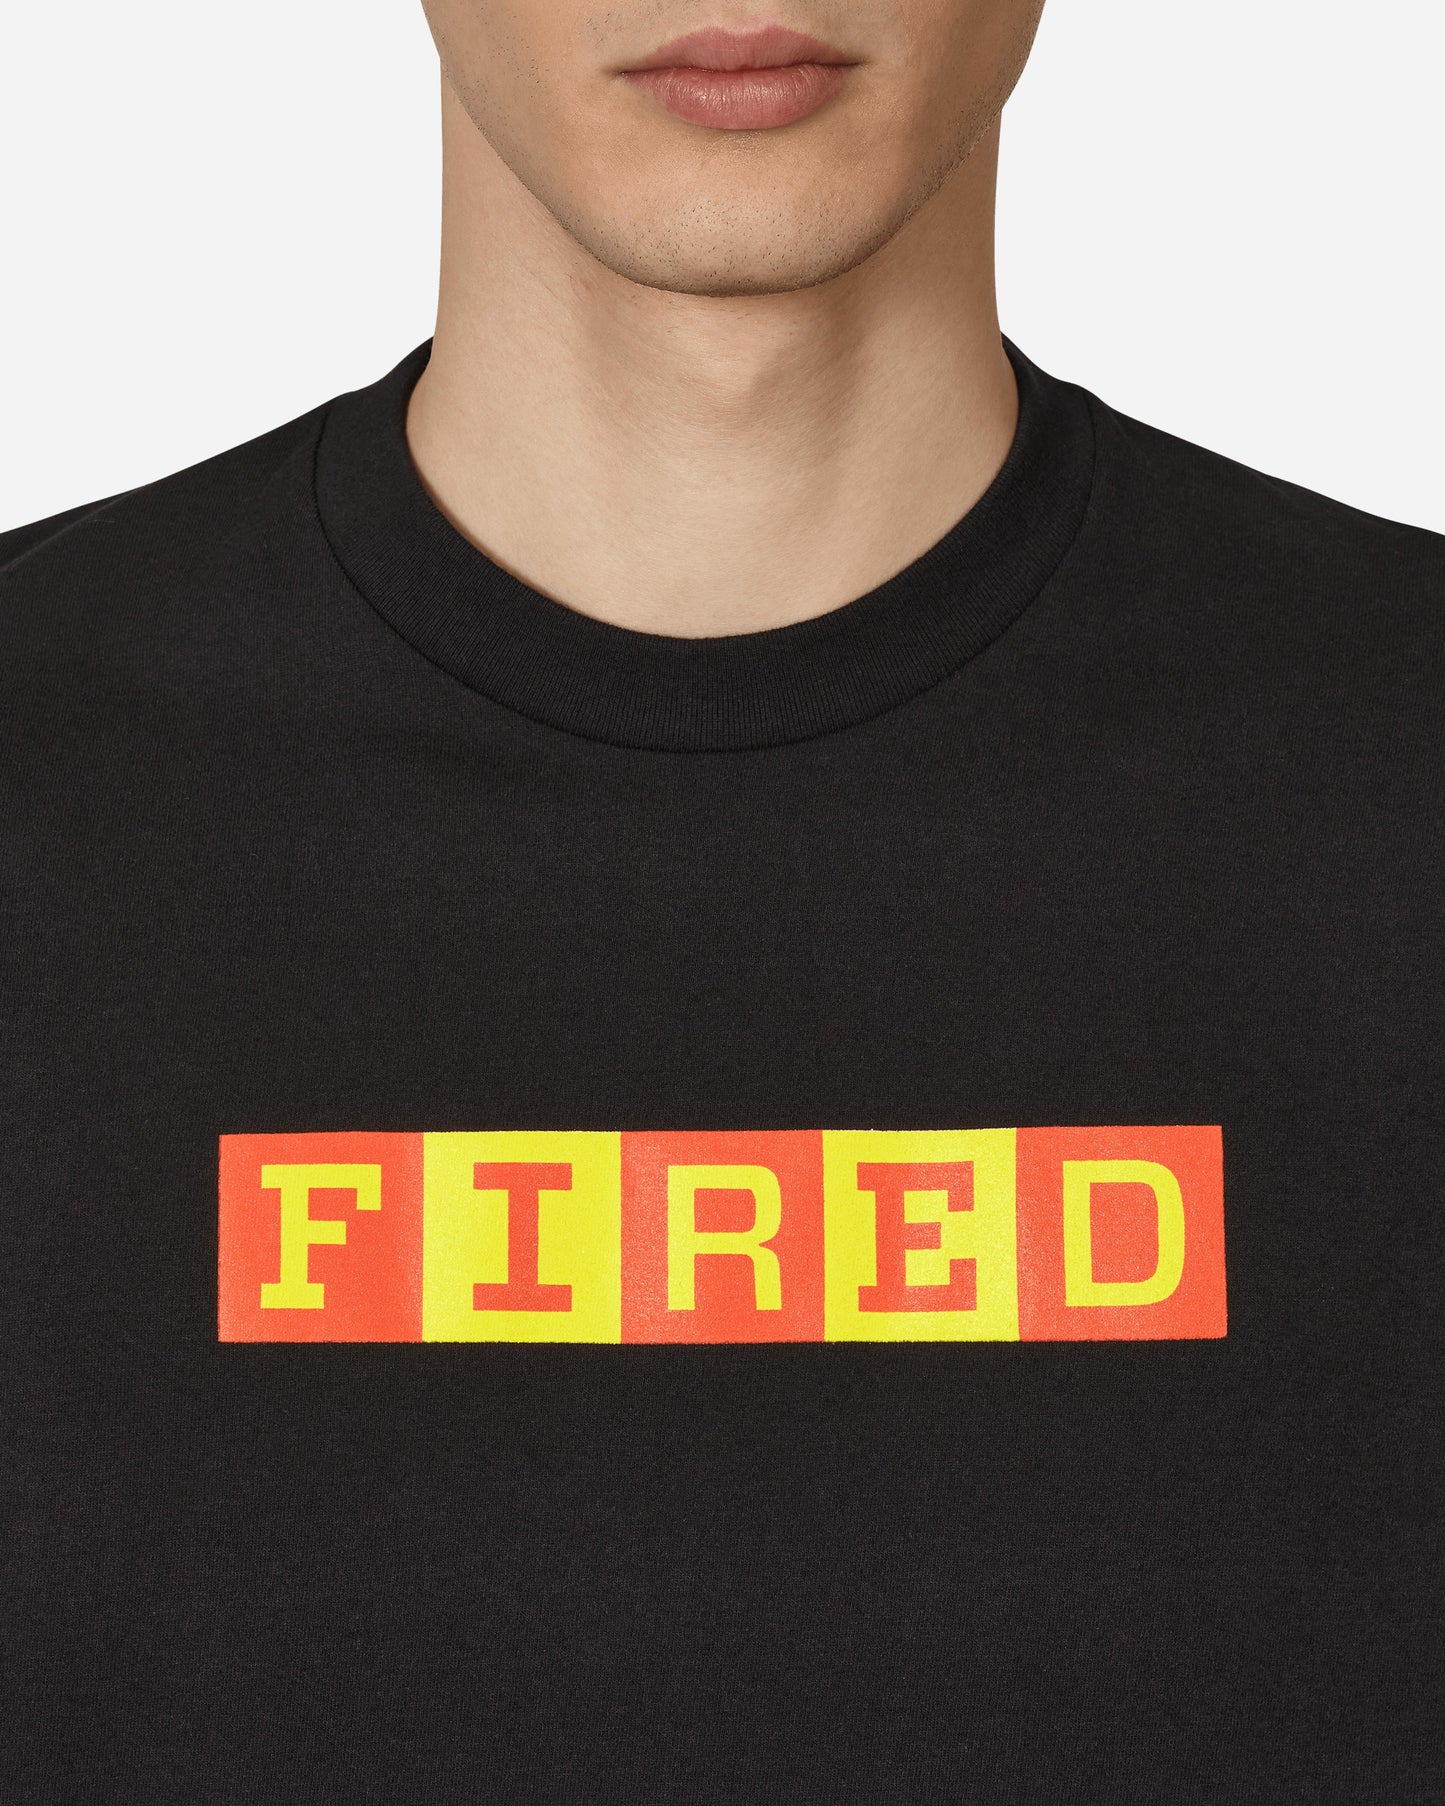 Serving The People Fired T-Shirt Black T-Shirts Shortsleeve STPF22FIREDTEE BLACK